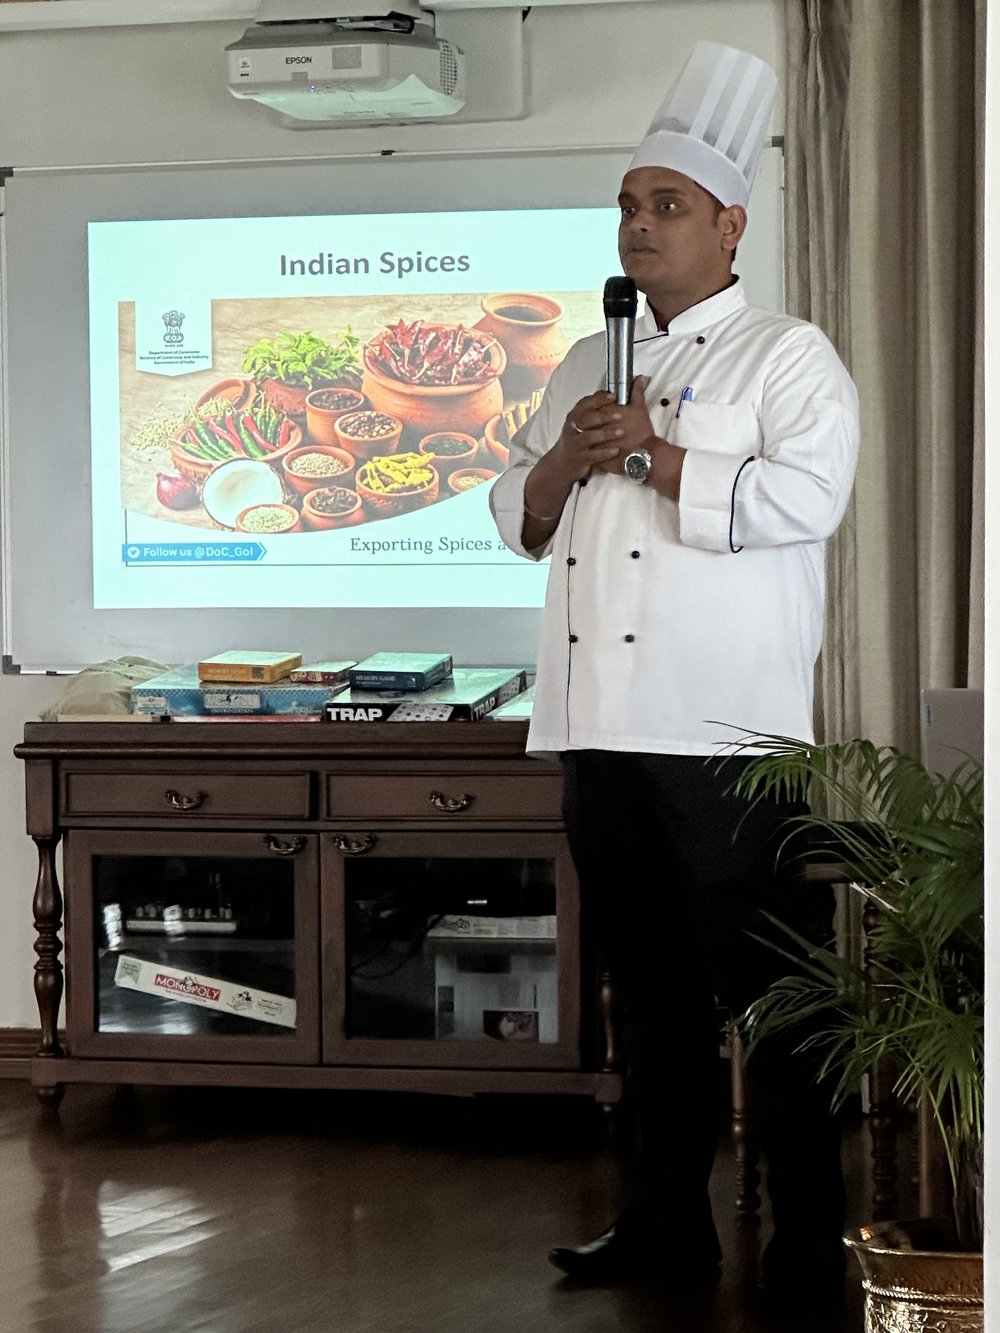 Ganges II Chef teaches us about Indian spices